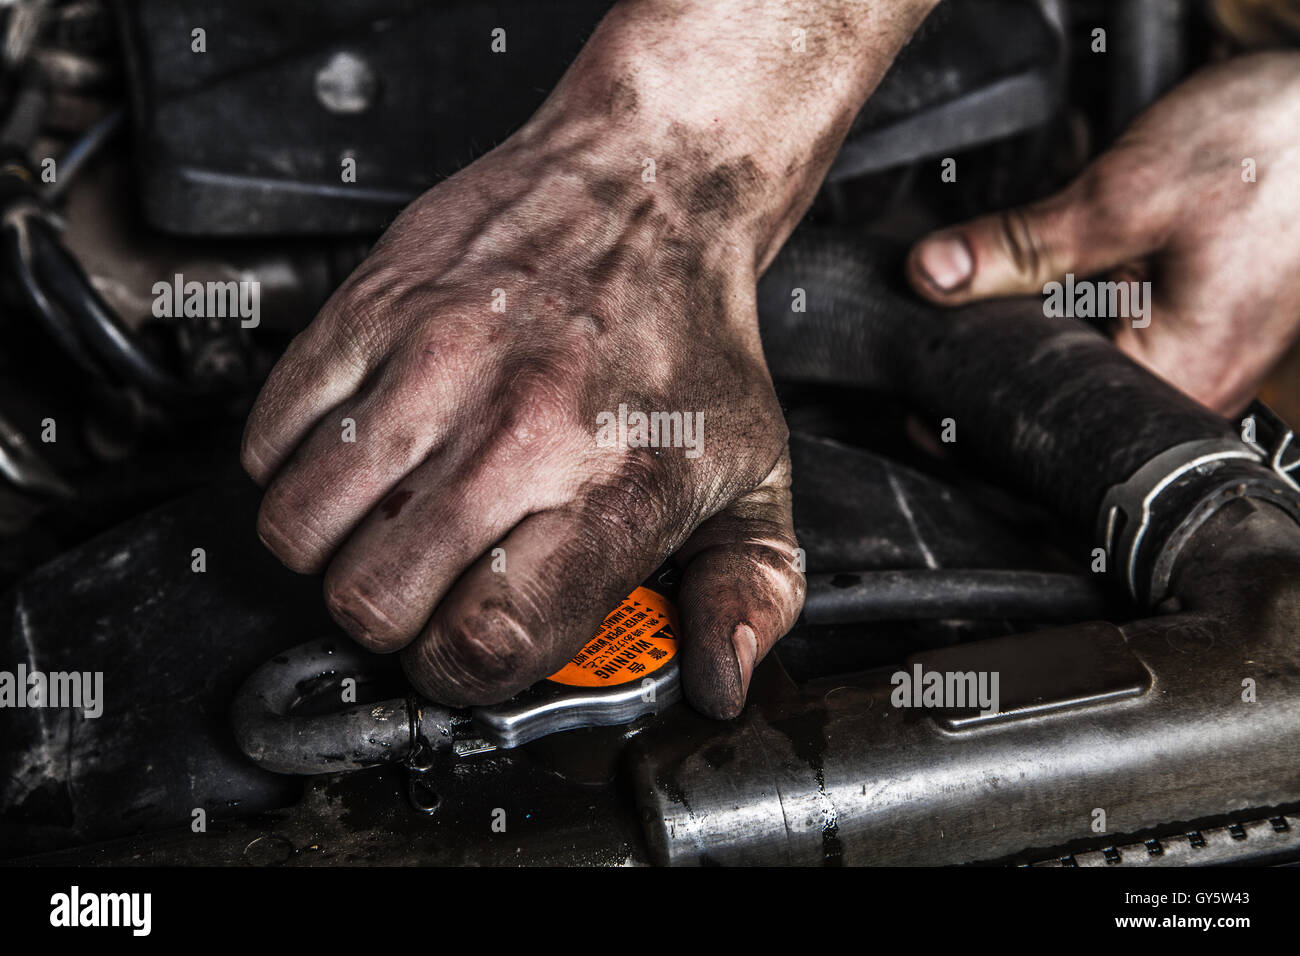 Working men with dirty hands and tools Stock Photo